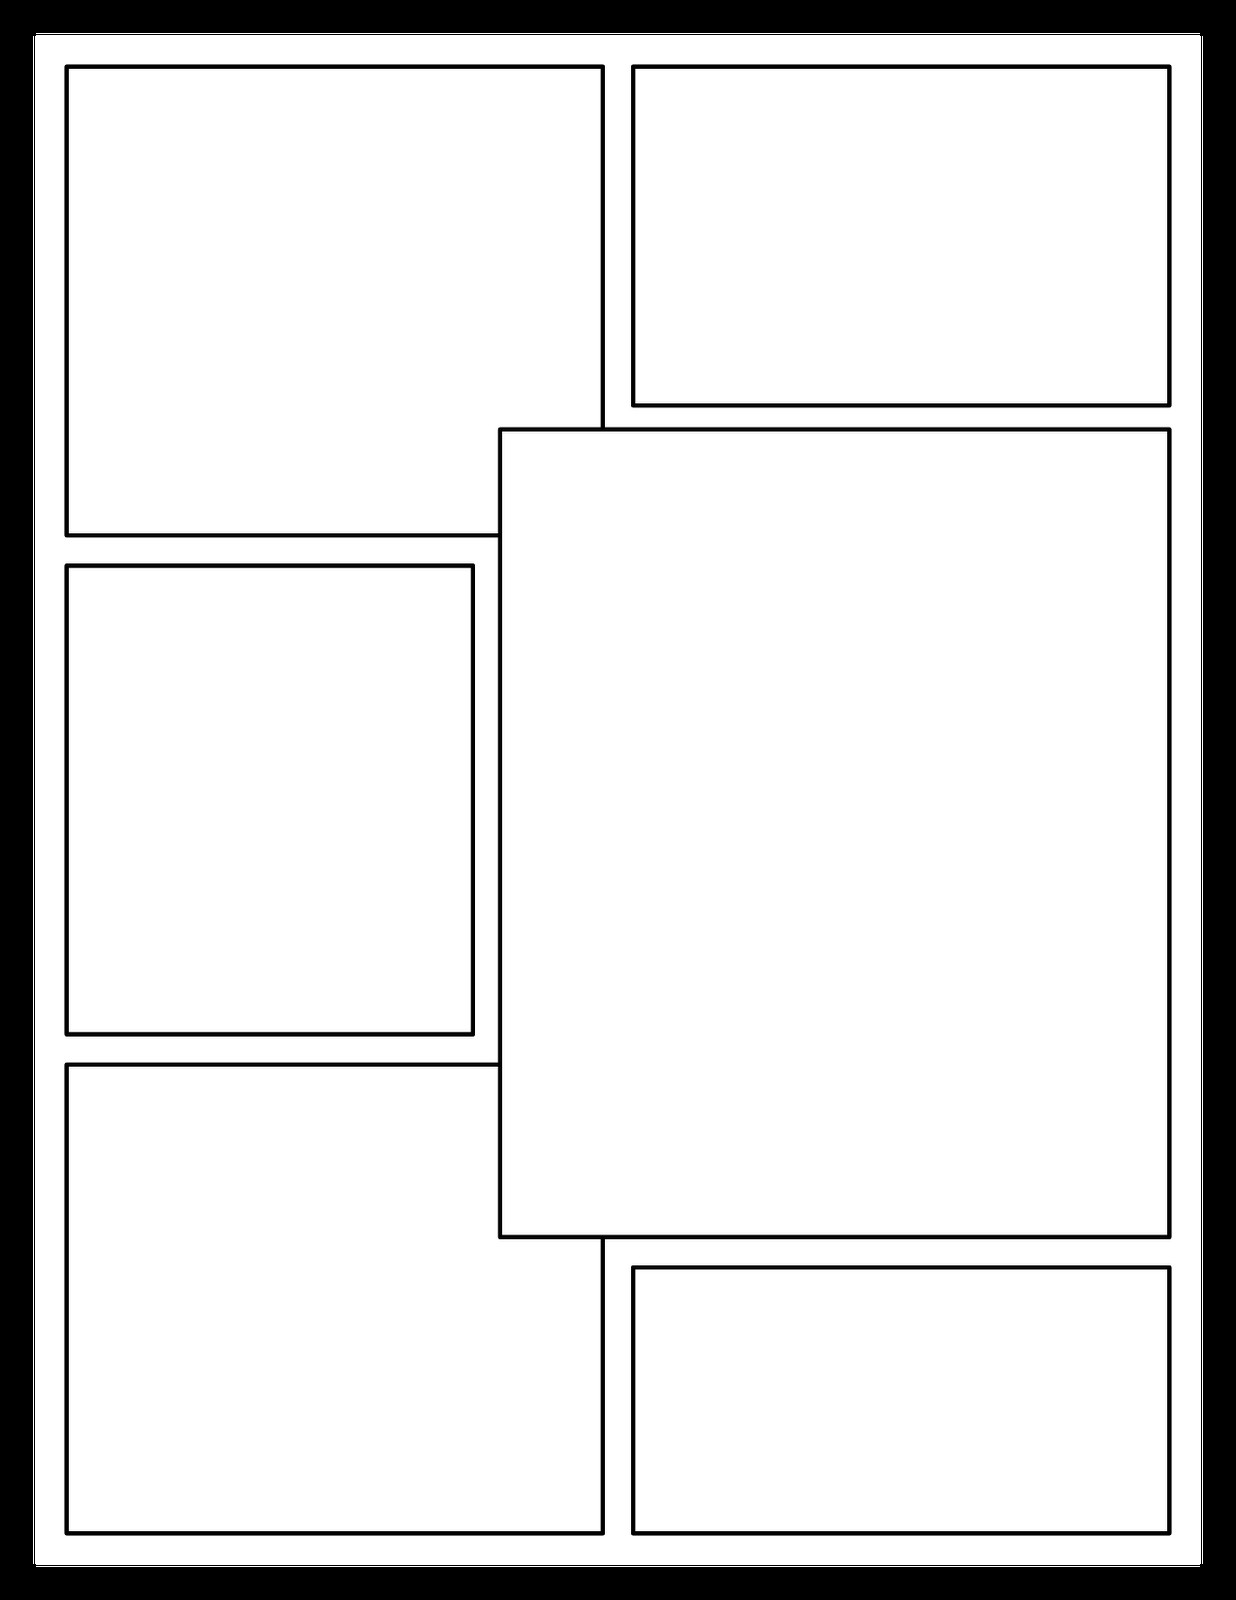 Comic Book Page Template Mrs orman S Classroom Fering Choices for Your Readers